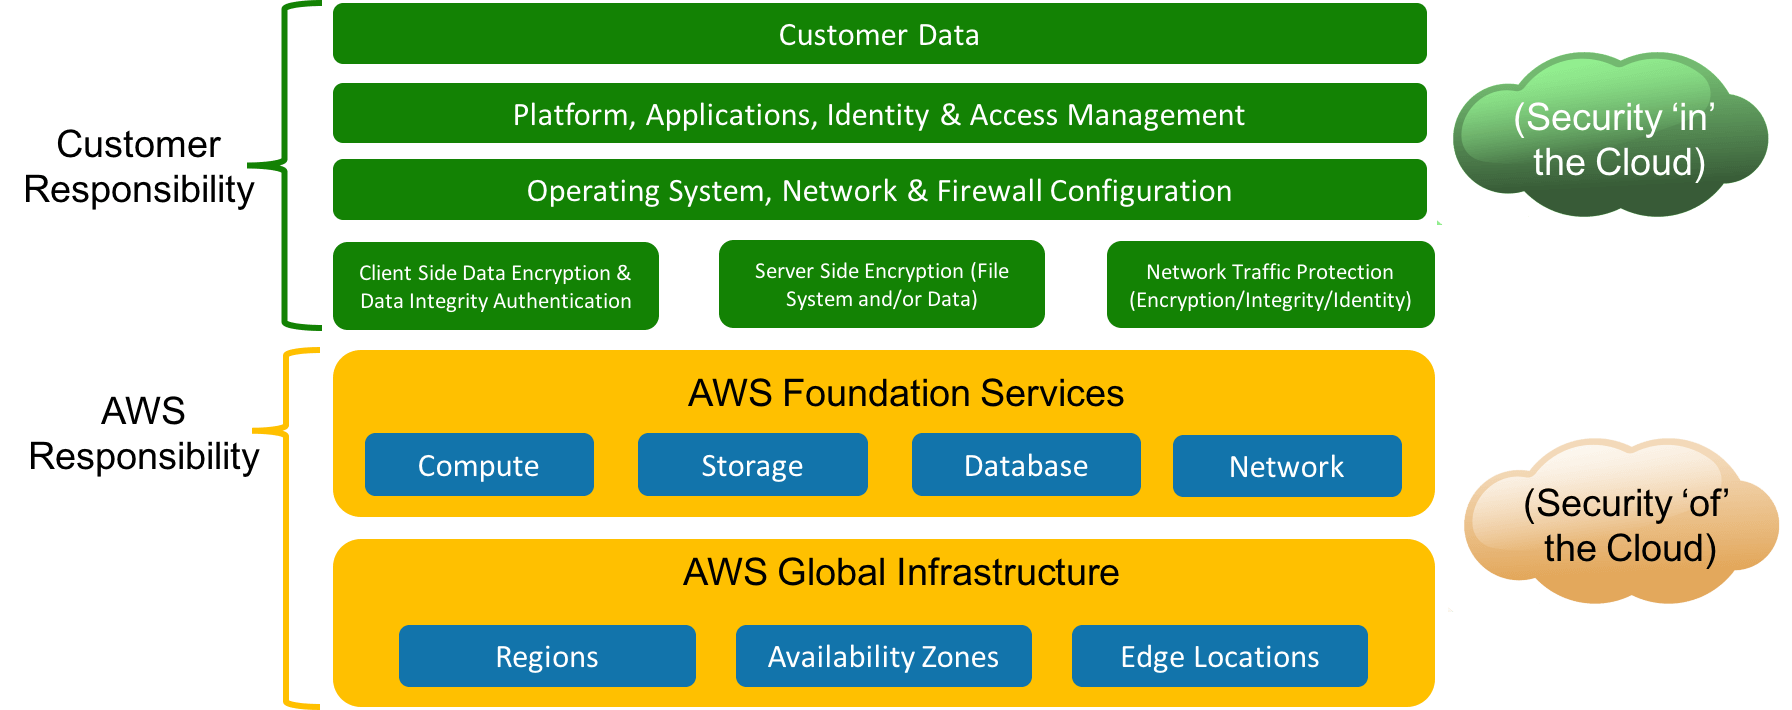 Customer Responsibility and AWS Responsibility